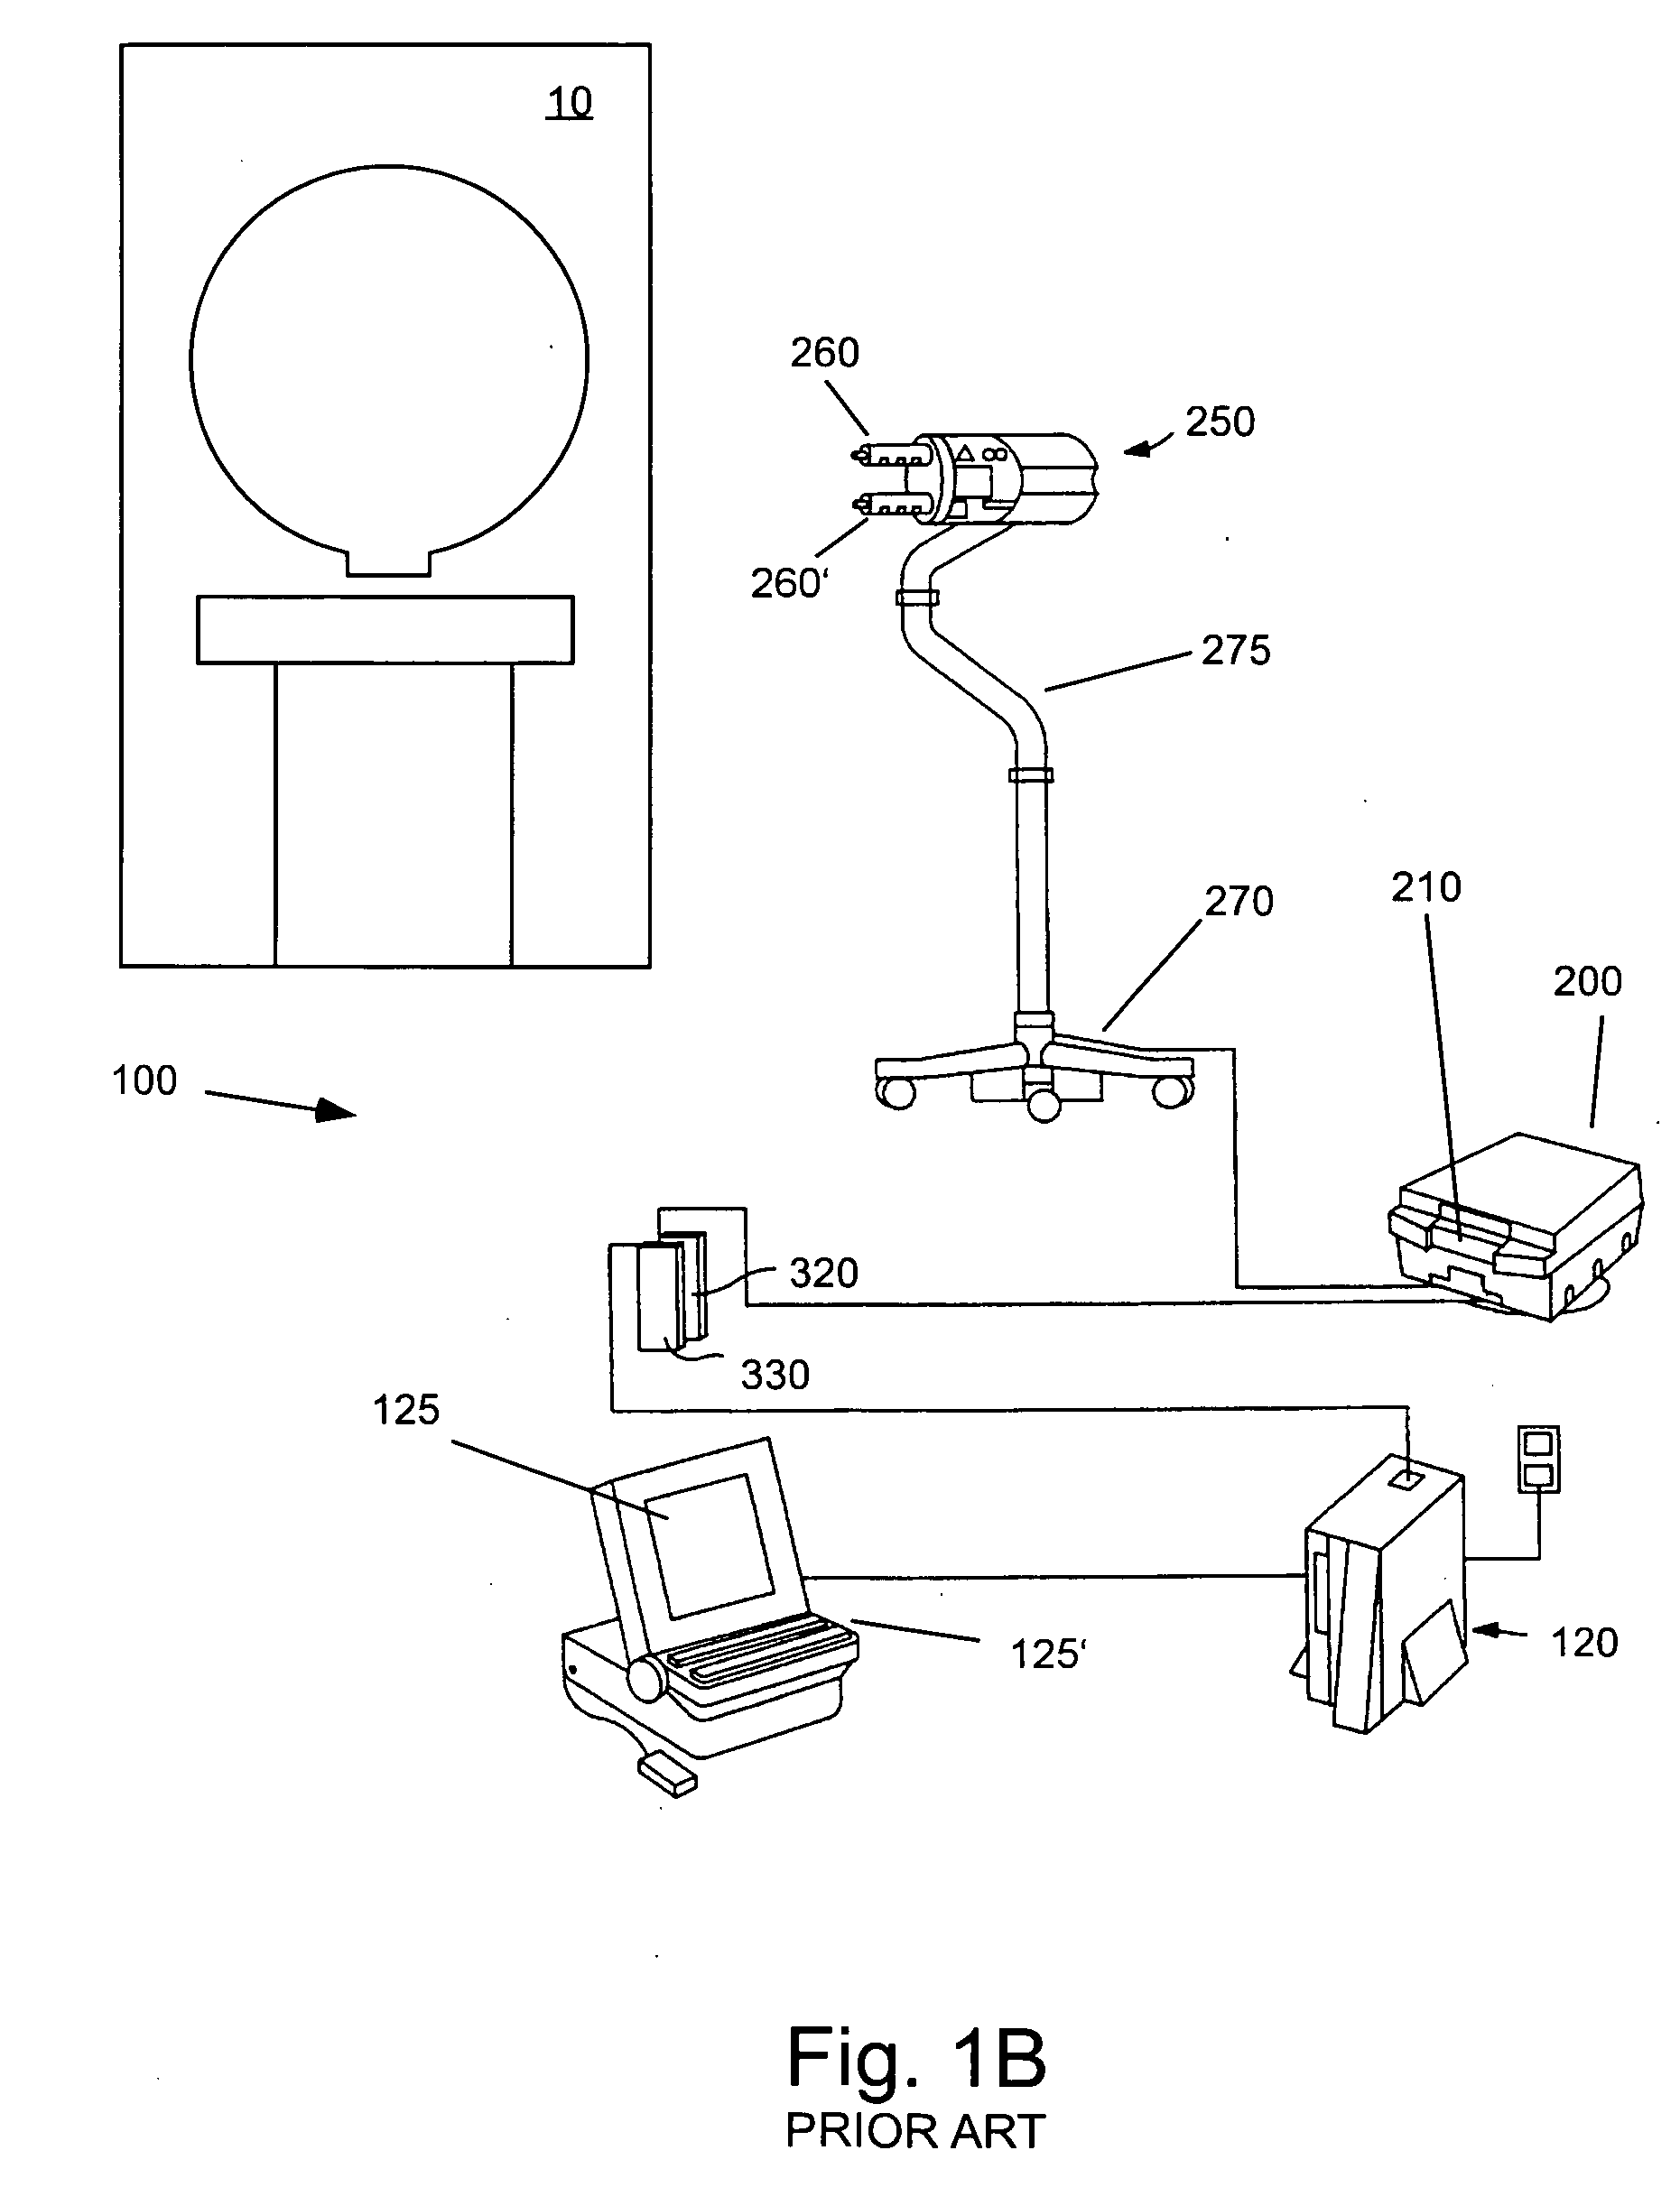 Injectors, injector systems and methods for injecting fluids